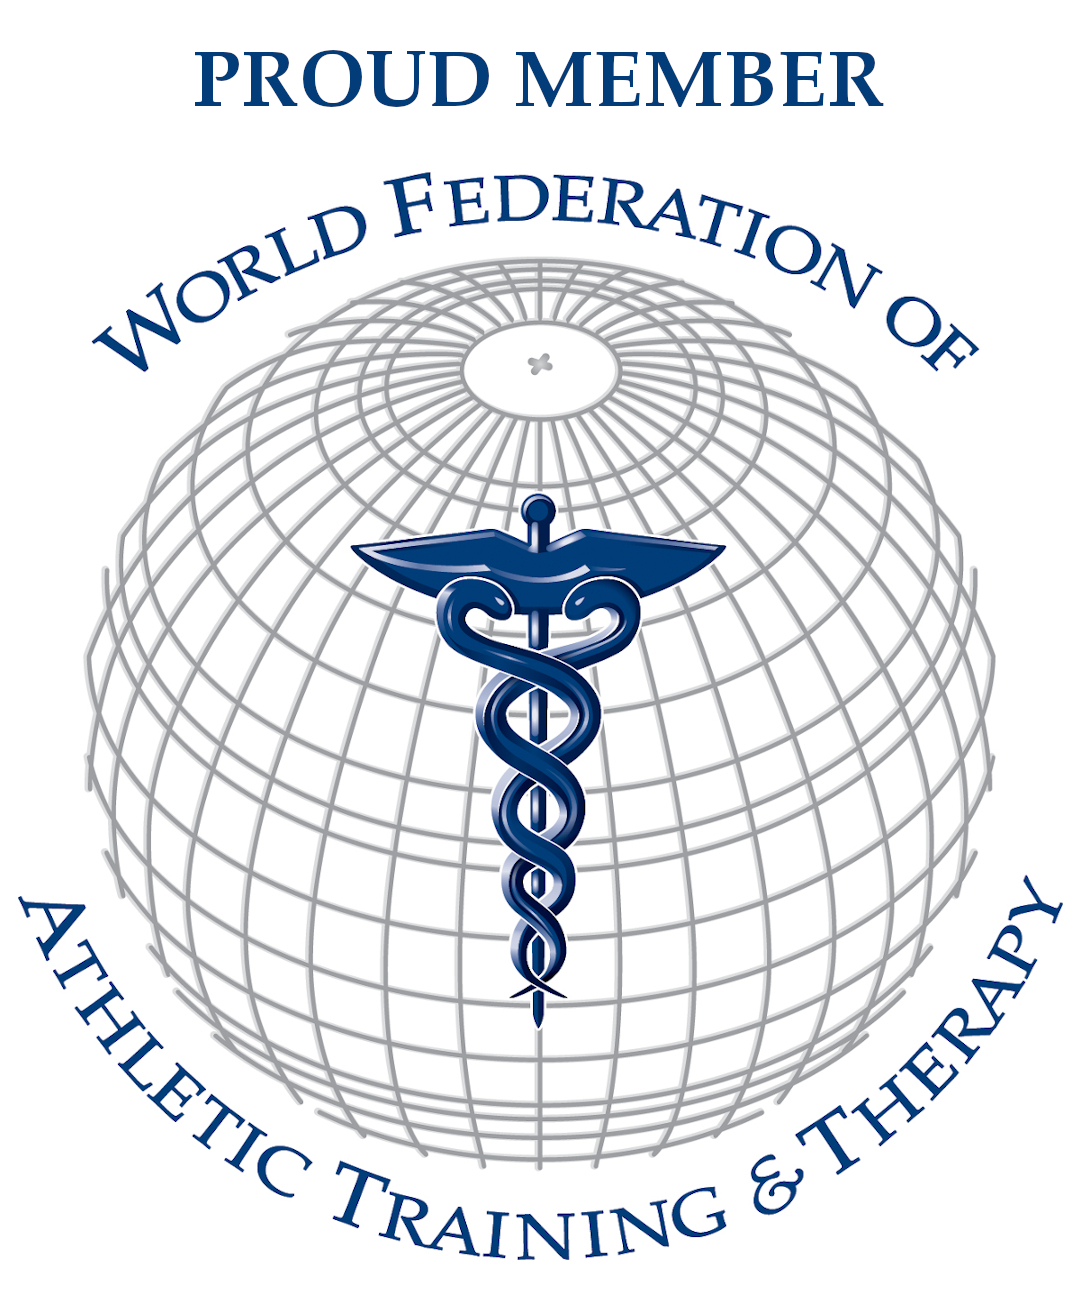 World Federation of Athletic Training & Therapy